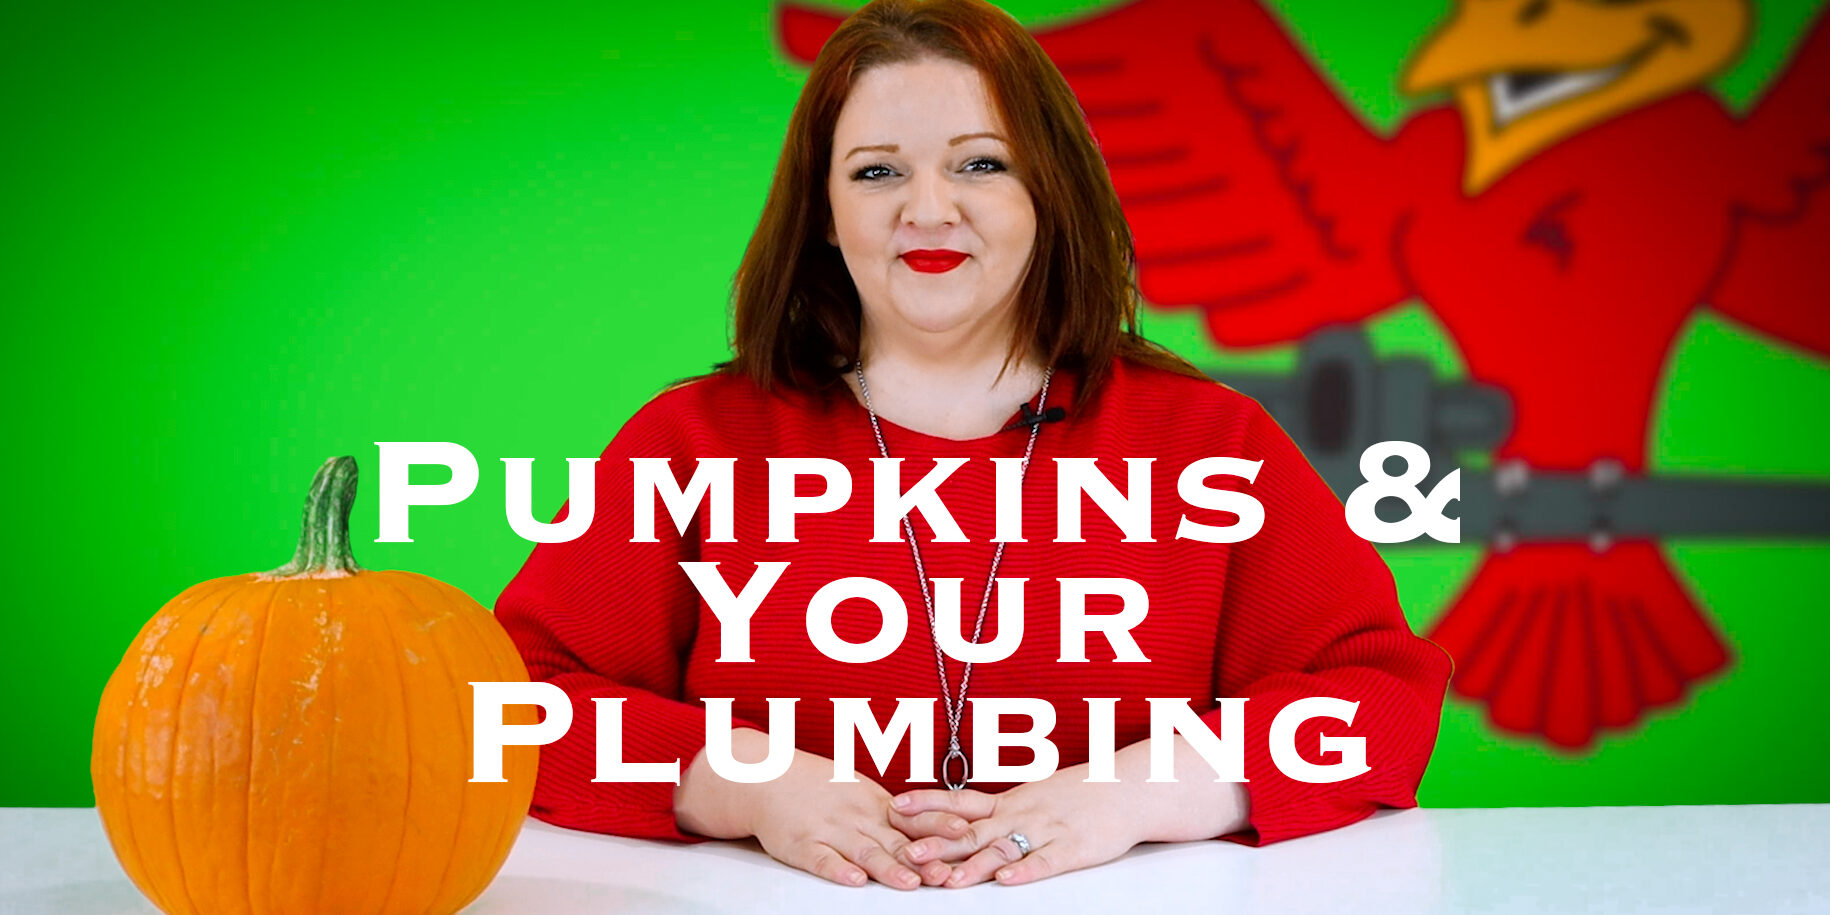 Cover photo for "Pumpkins and Your Plumbing"